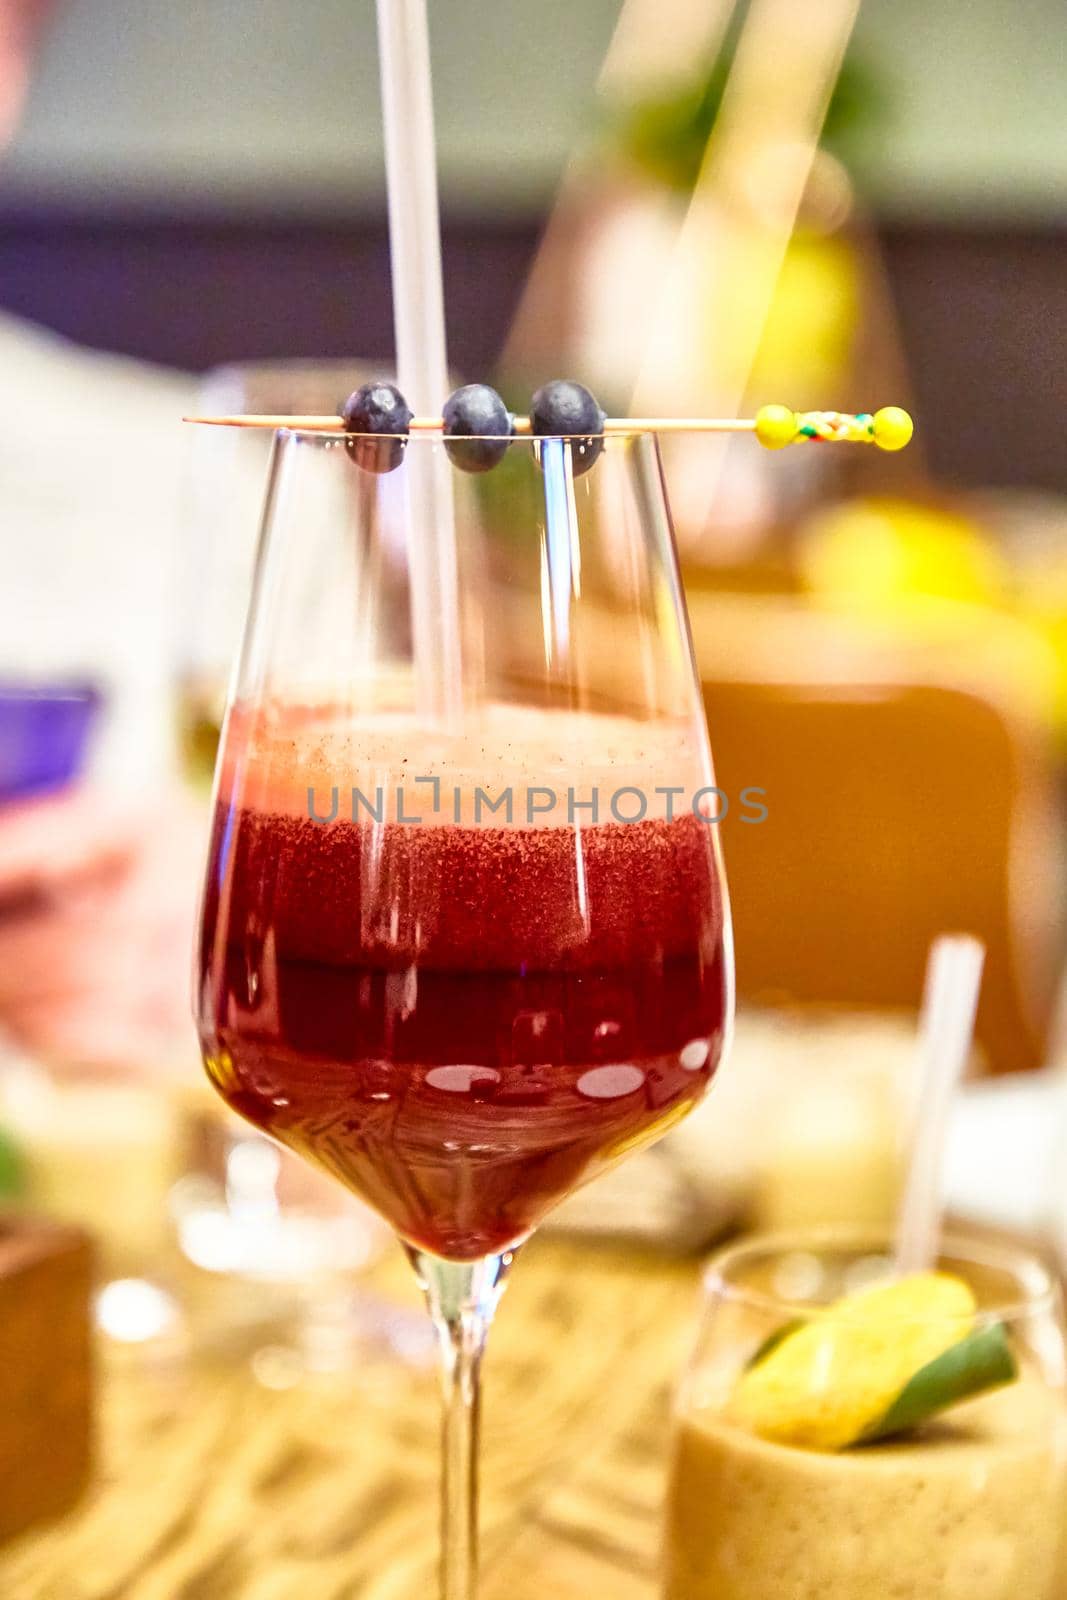 Cocktail or smoothie in a wine glass is on the table